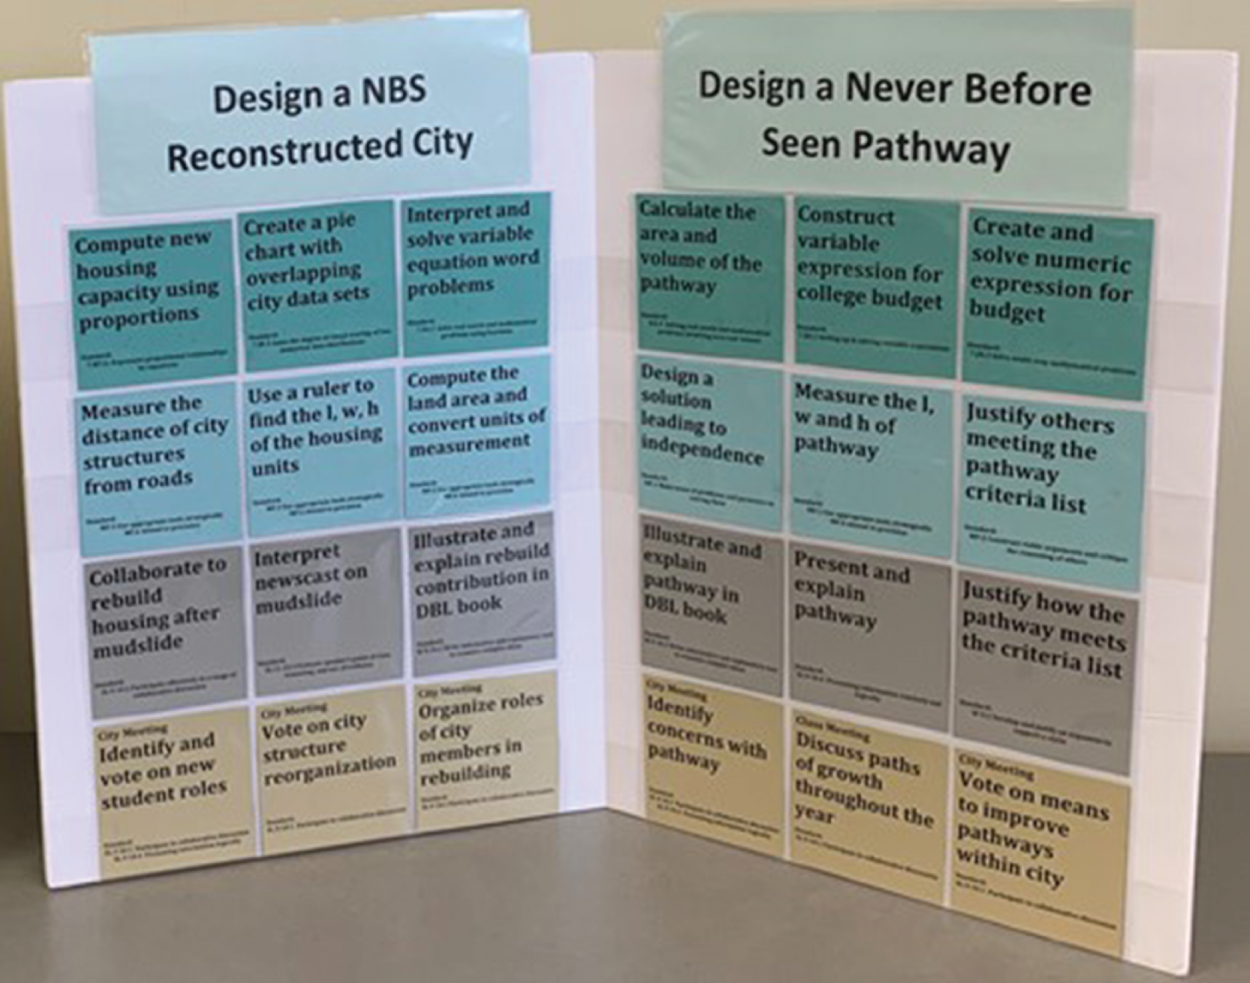 Photo depicts a close-up view of two Long-Range Planning Boards displaying Design Challenges with related Guided Lessons, developed by high school Math teacher Rana Masri.